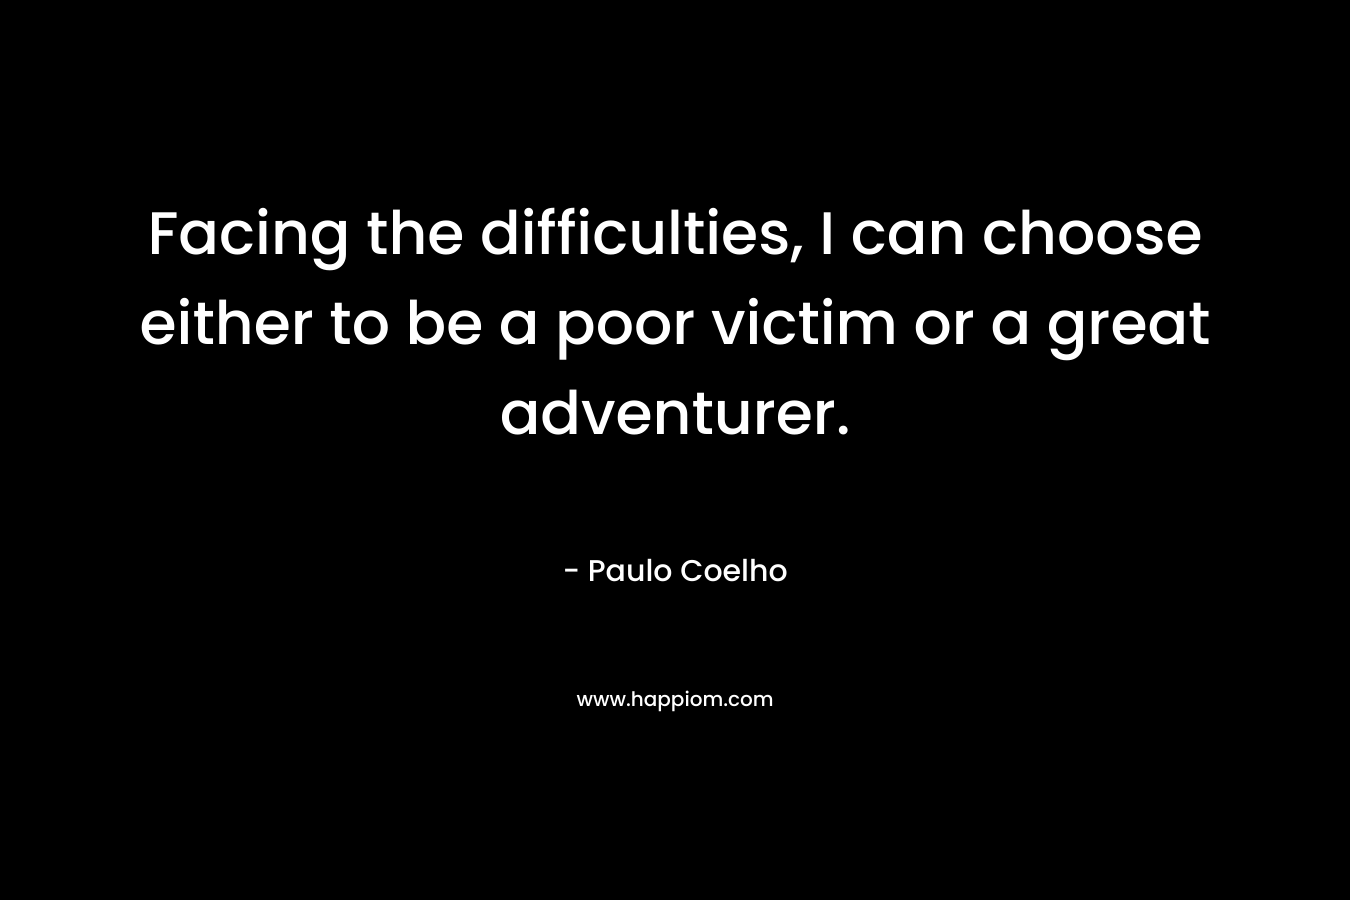 Facing the difficulties, I can choose either to be a poor victim or a great adventurer. – Paulo Coelho